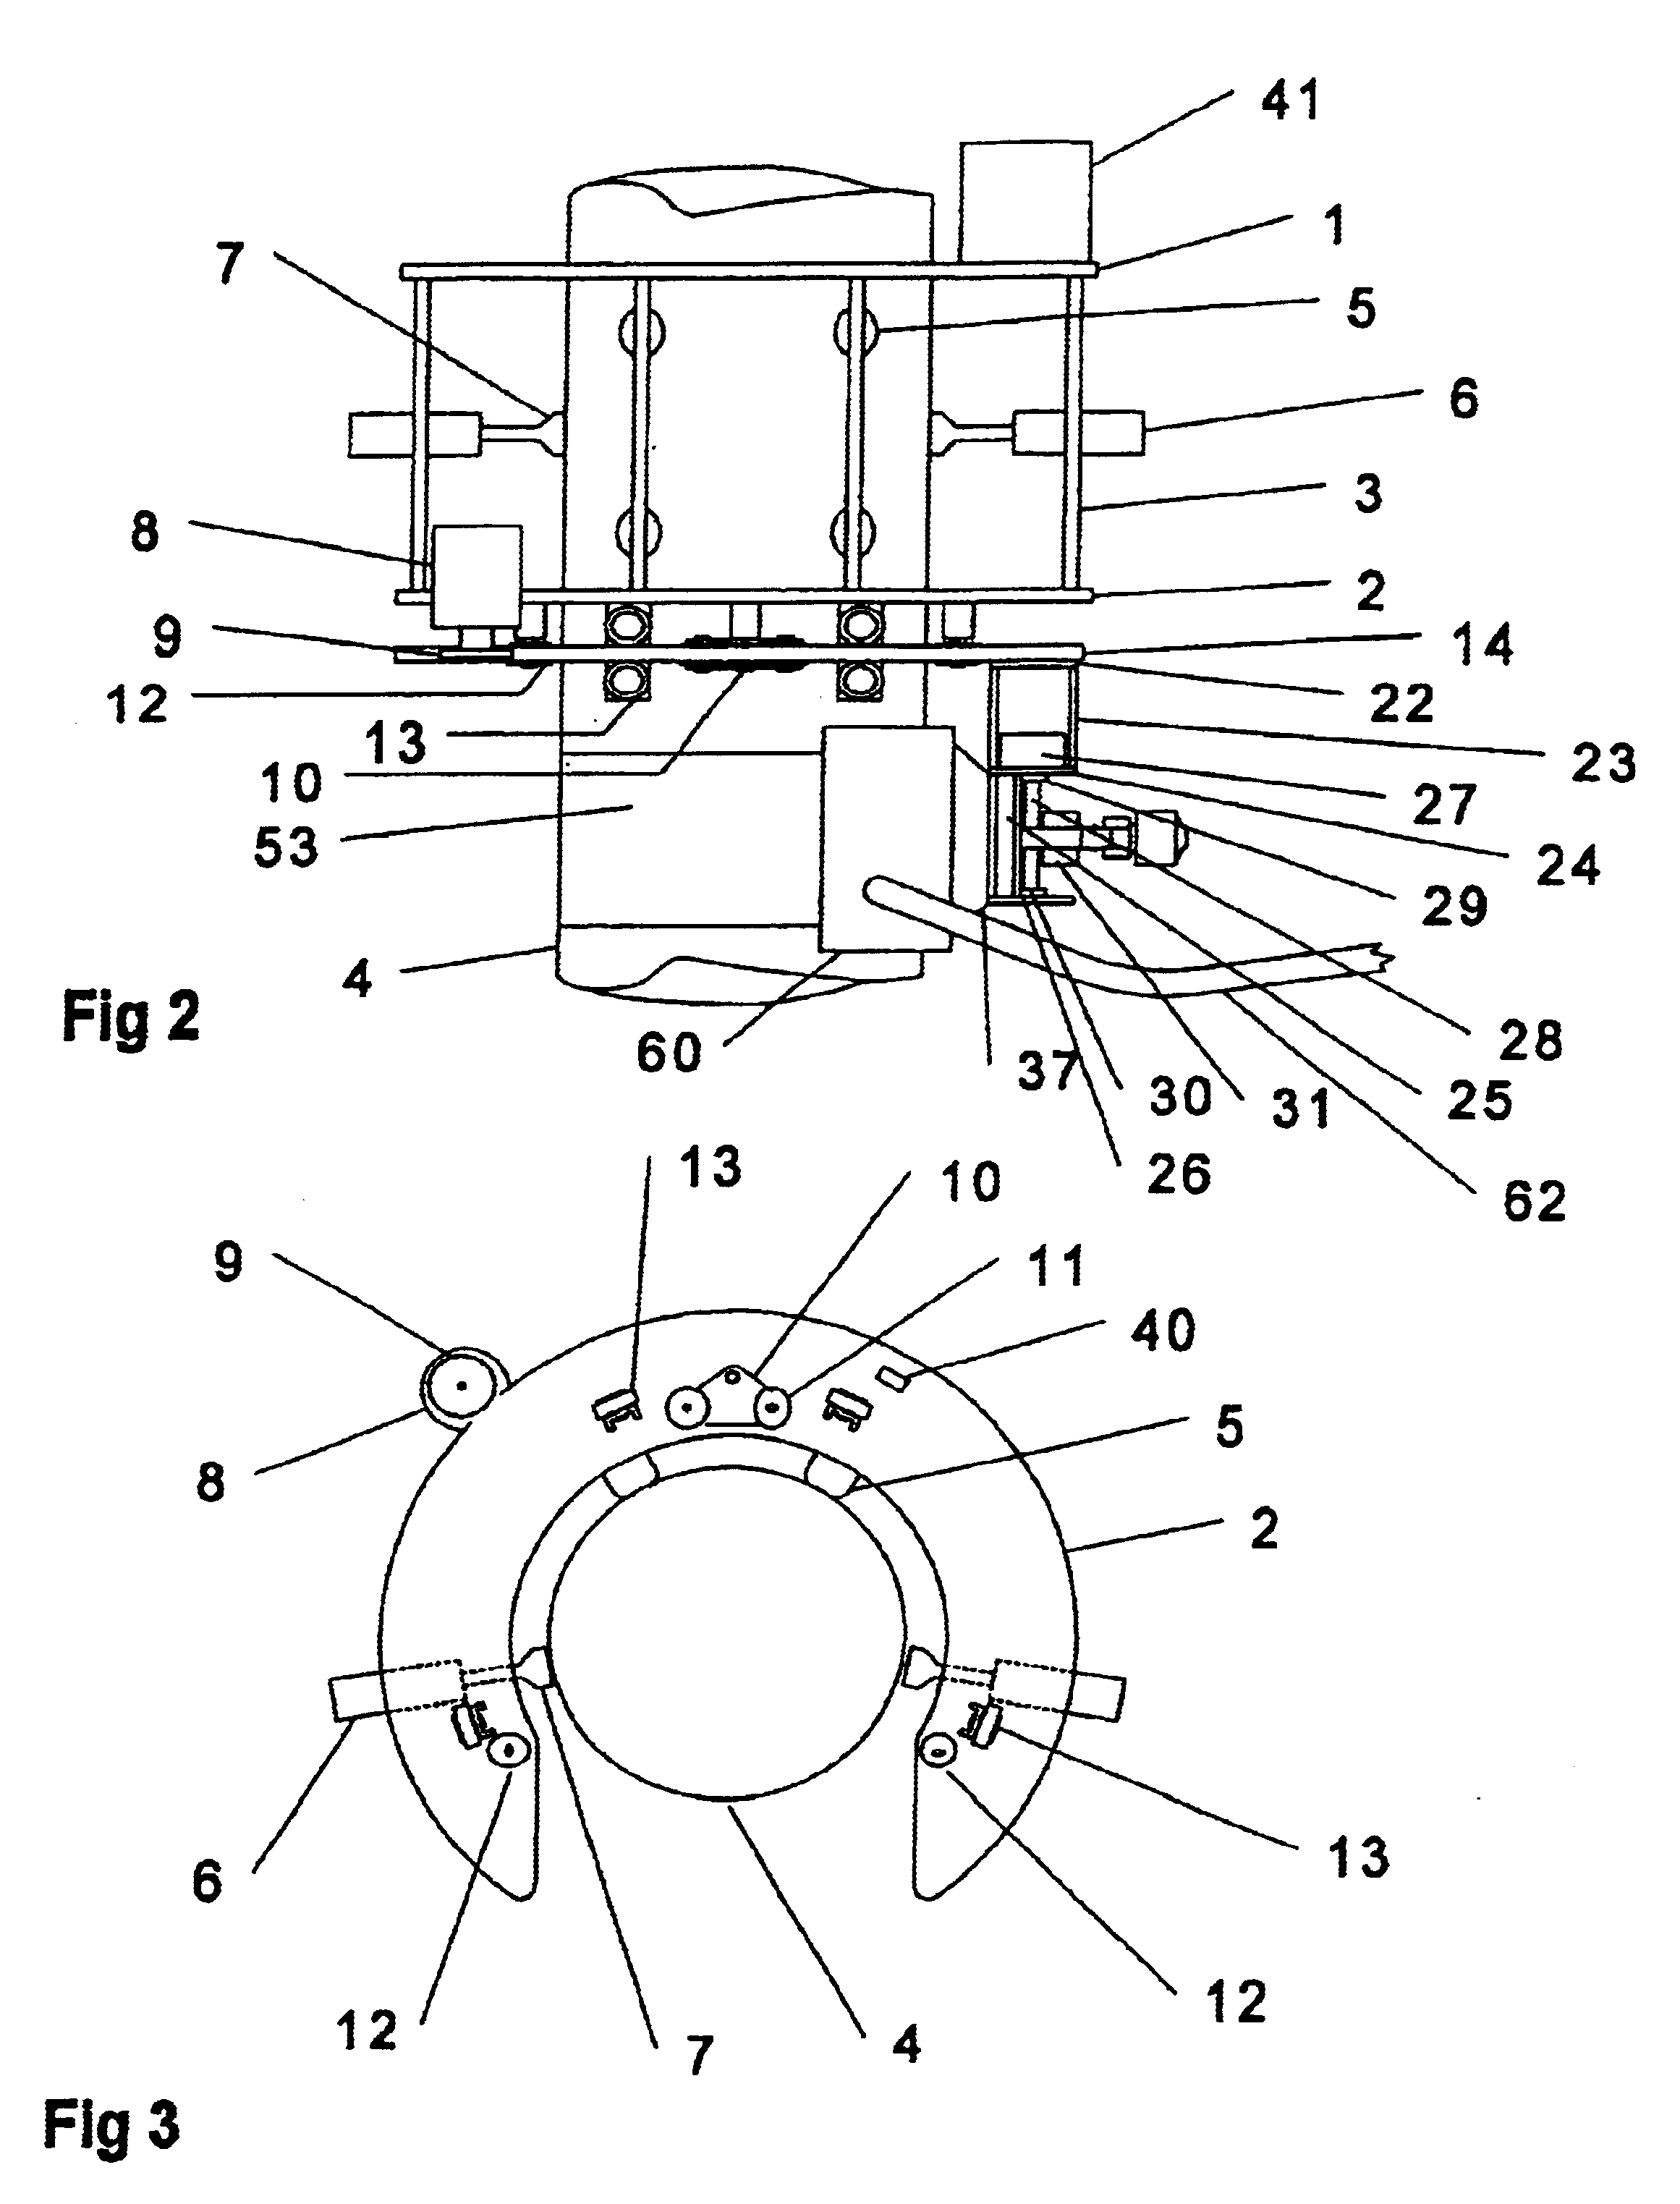 Apparatus and method for coating pipes